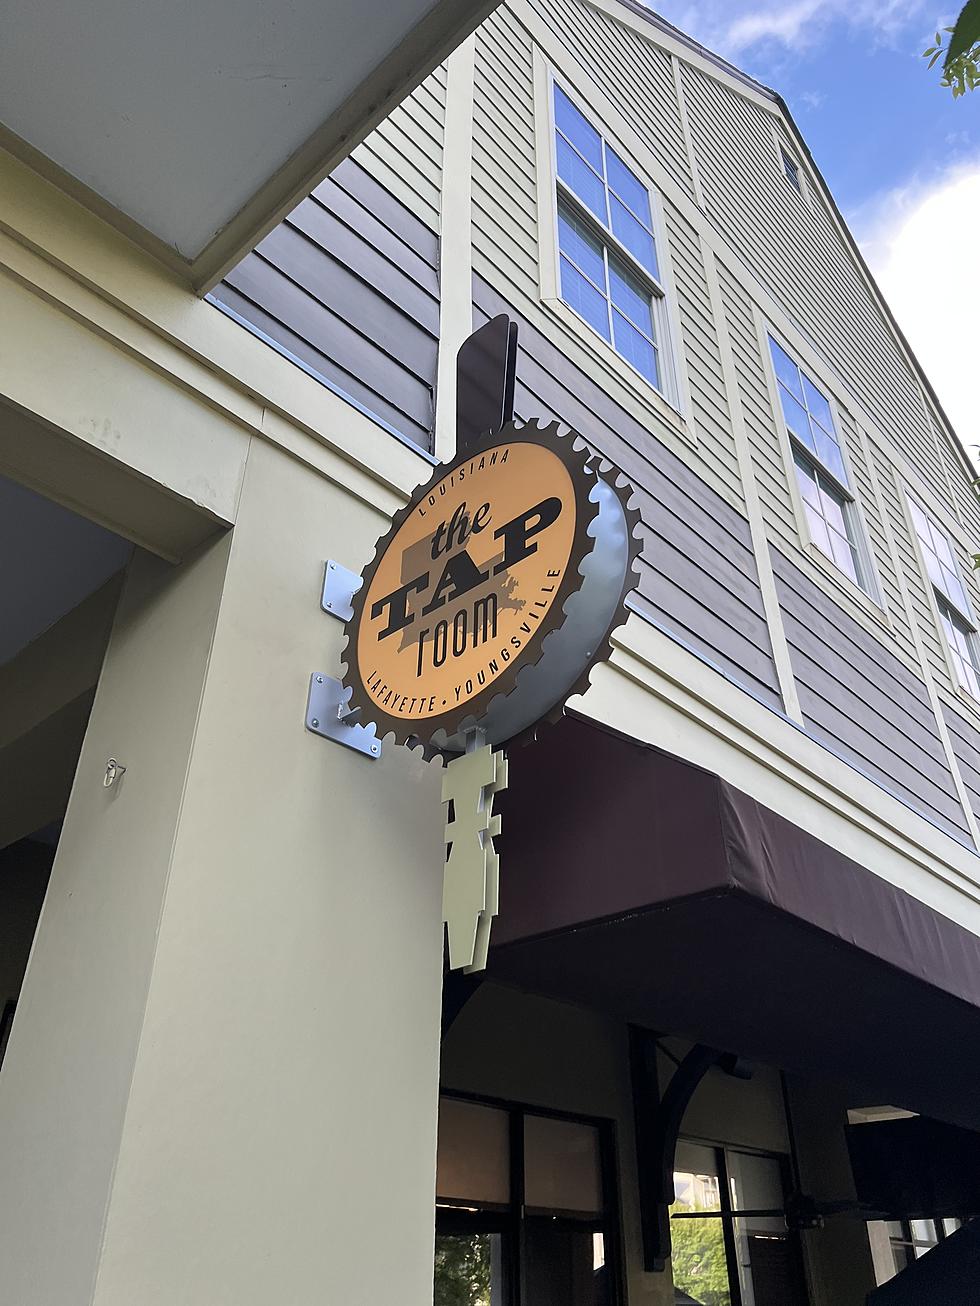 GRAND OPENING – The Tap Room in Youngsville